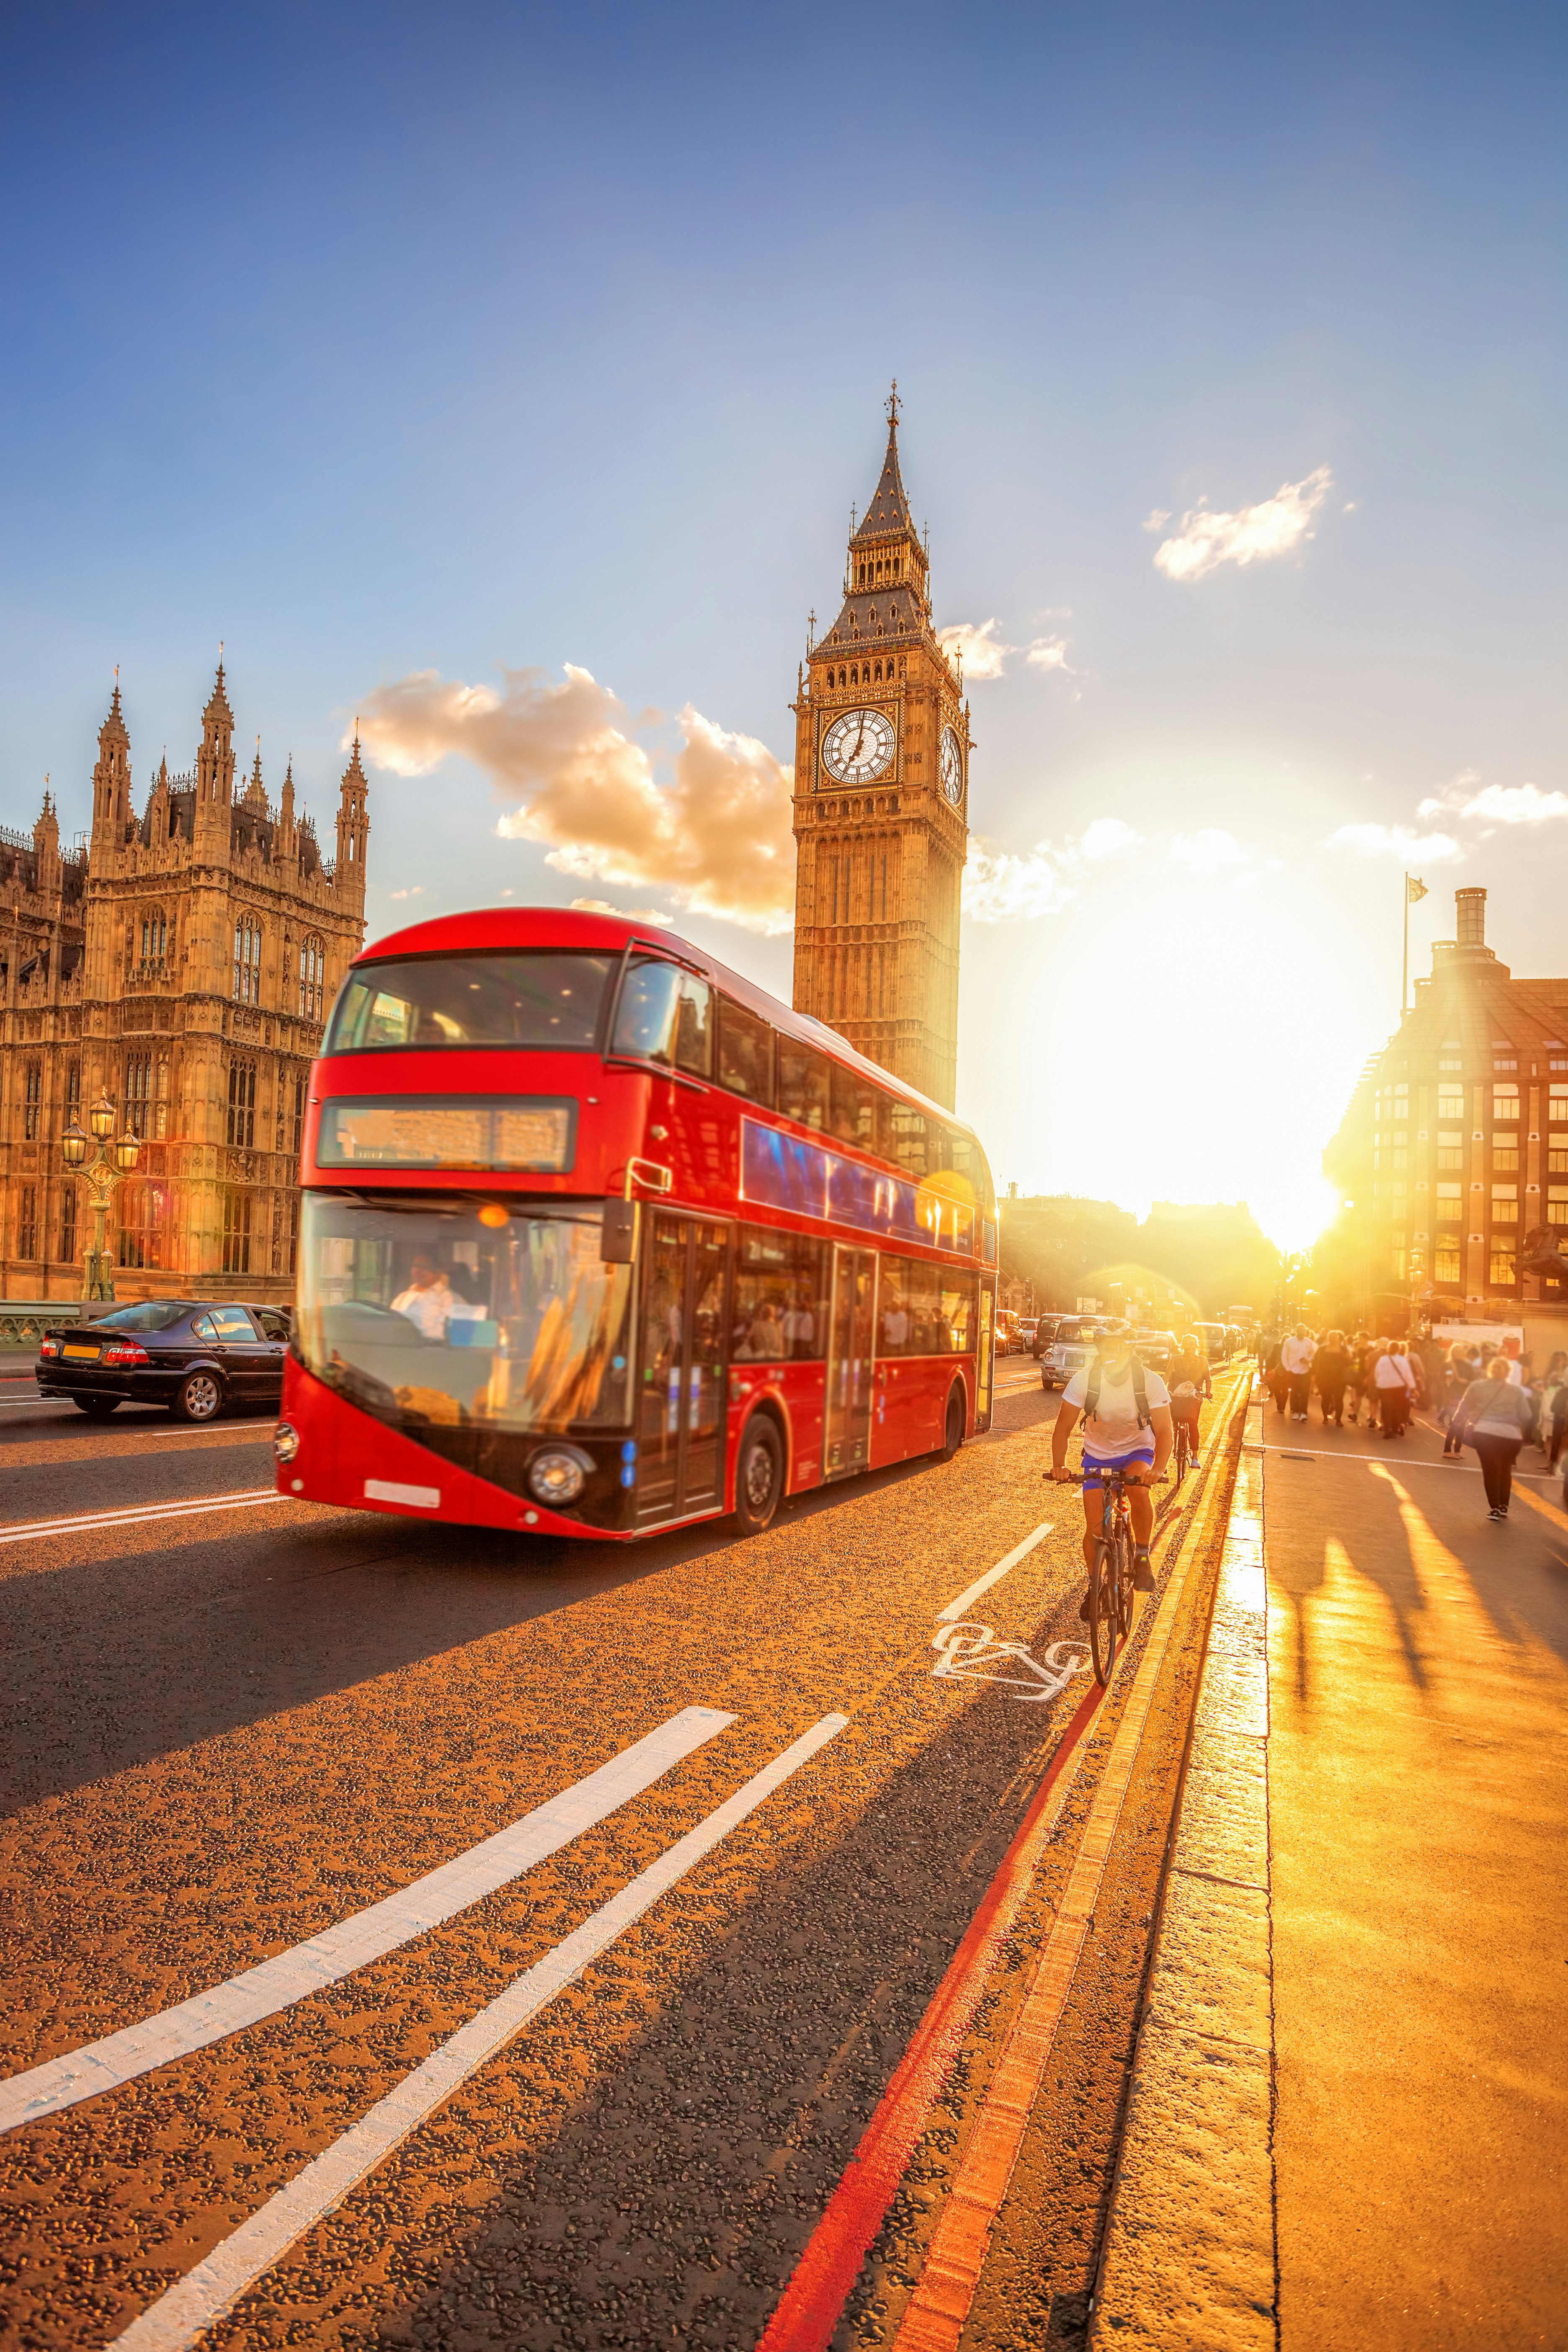 A golden-hour photo taken on Westminster Bridge in London. The sun is low in the sky, casting a glow over the scene of Big Ben, the Houses of Parliament, a red London bus, and people walking and cycling over the bridge.